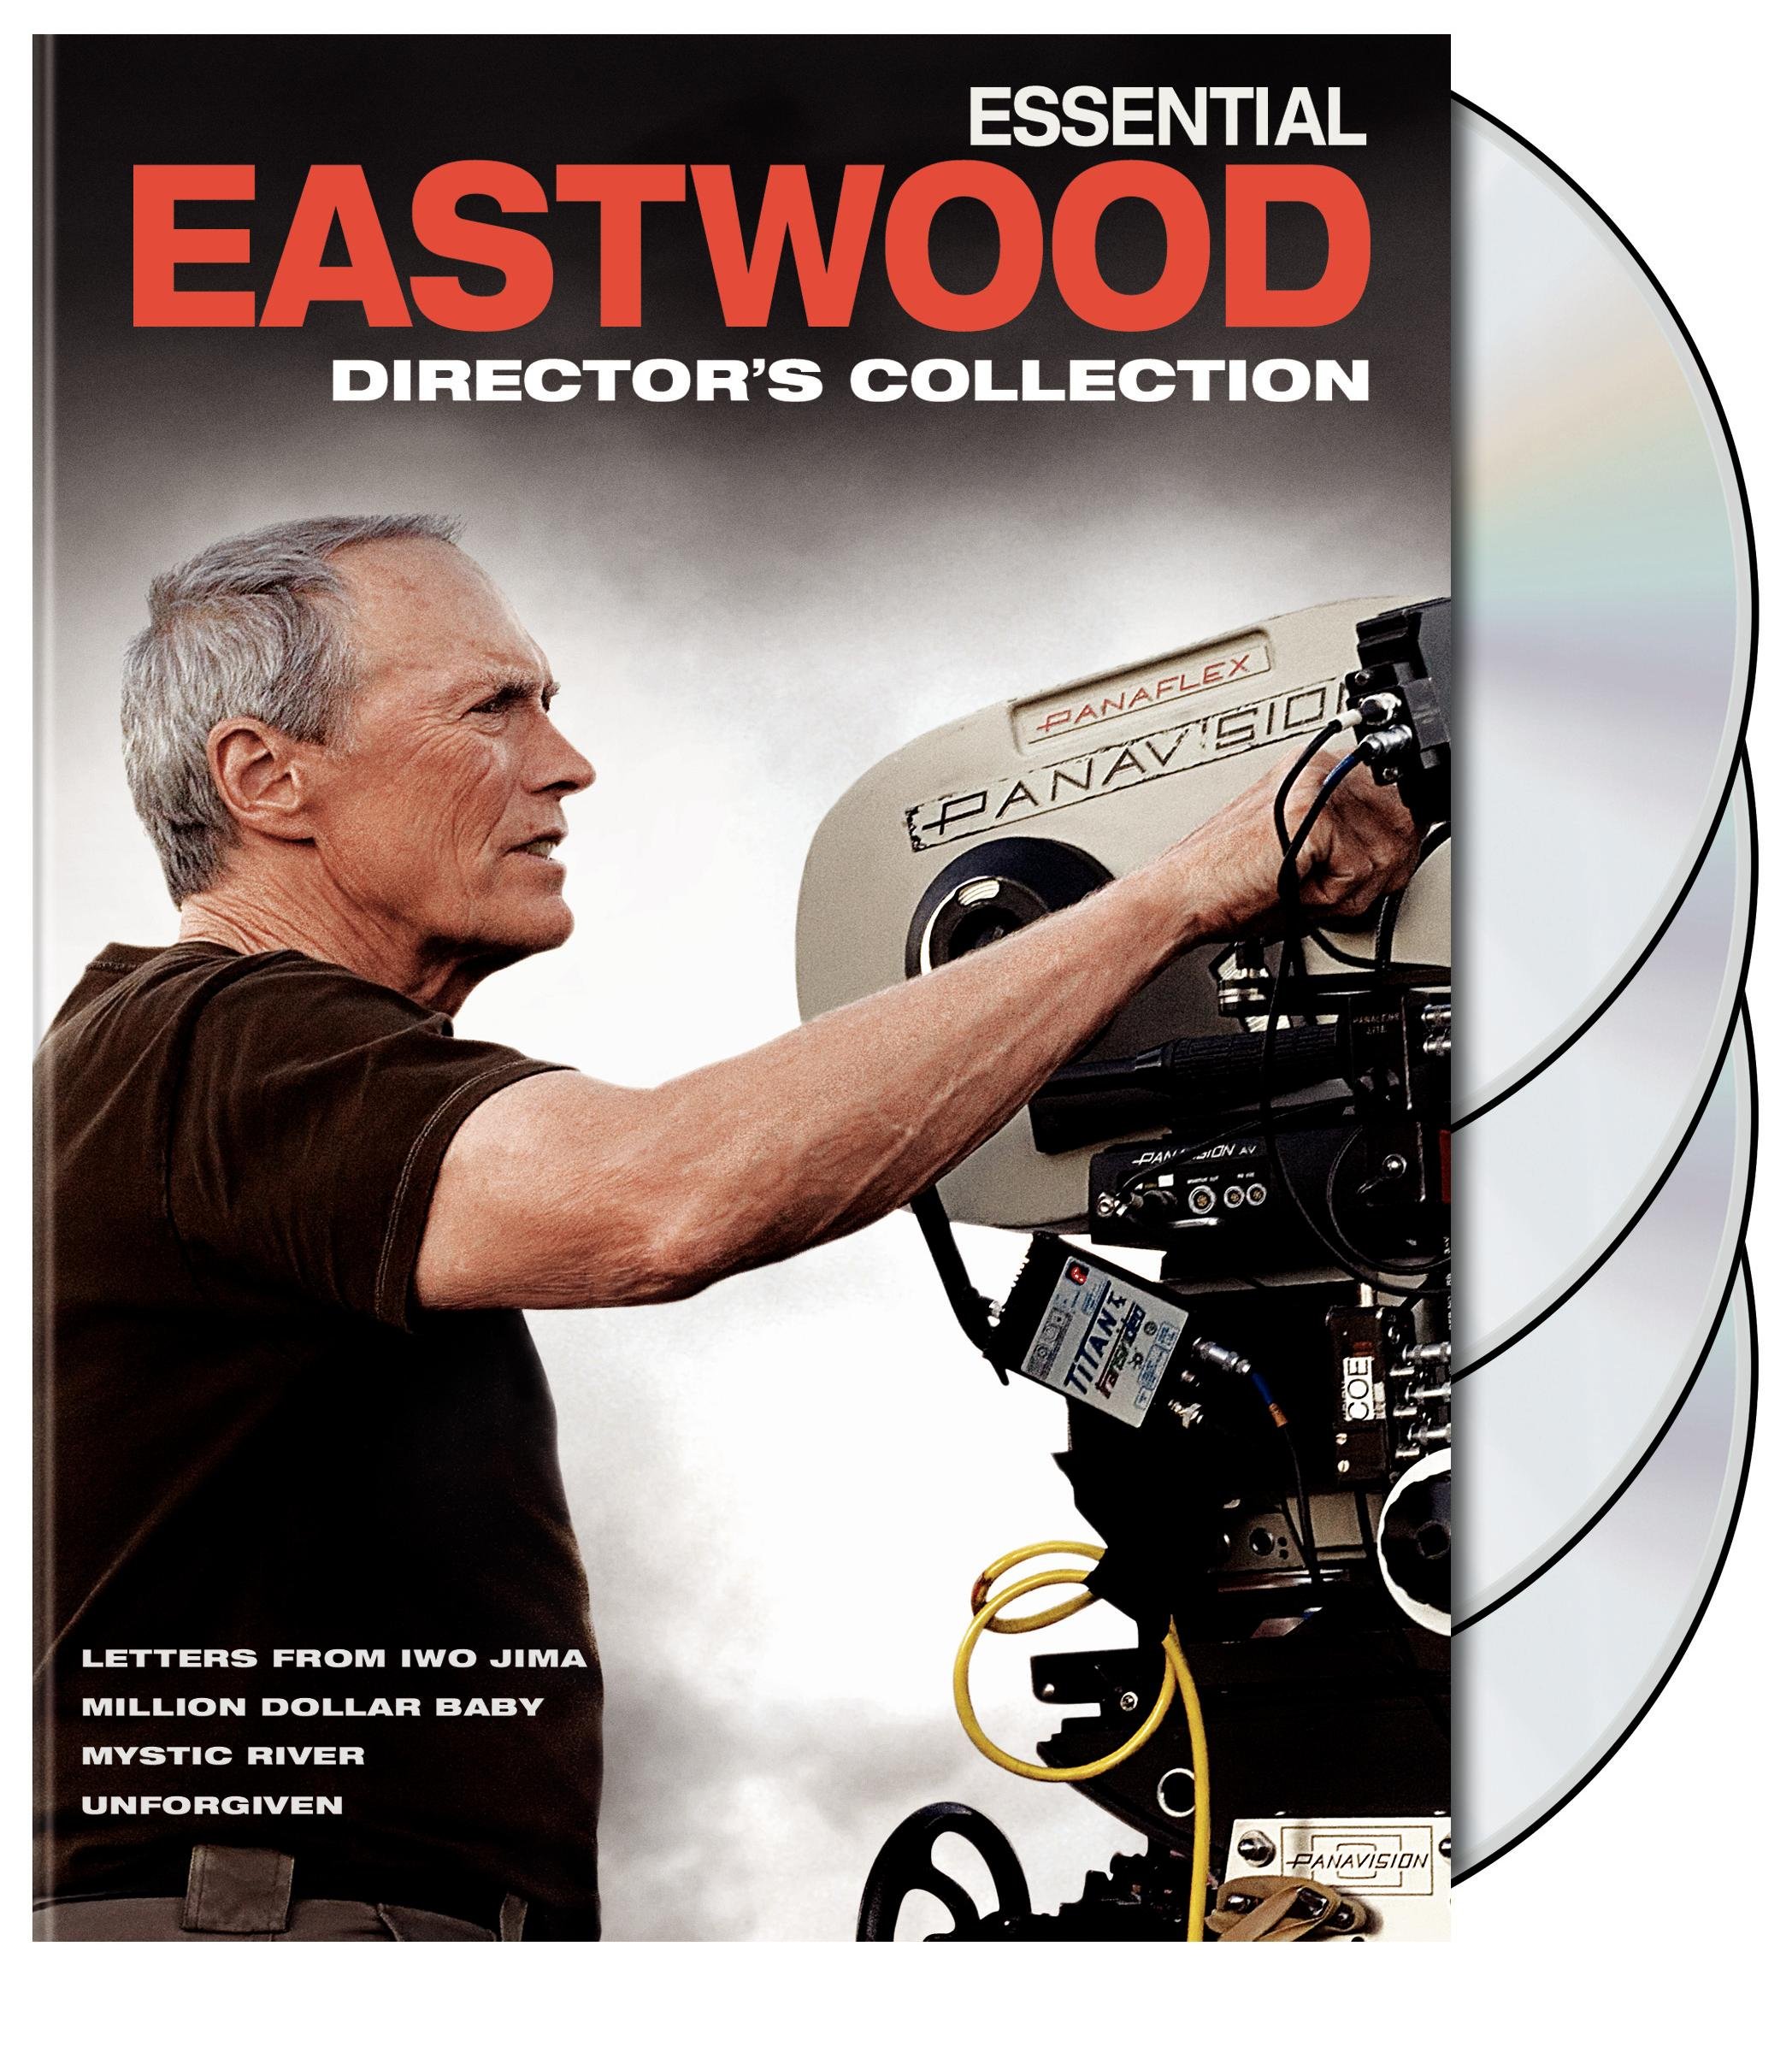 Essential Eastwood: Director’s Collection V1 (Letters from Iwo Jima / Million Dollar Baby / Mystic River / Unforgiven) on MovieShack